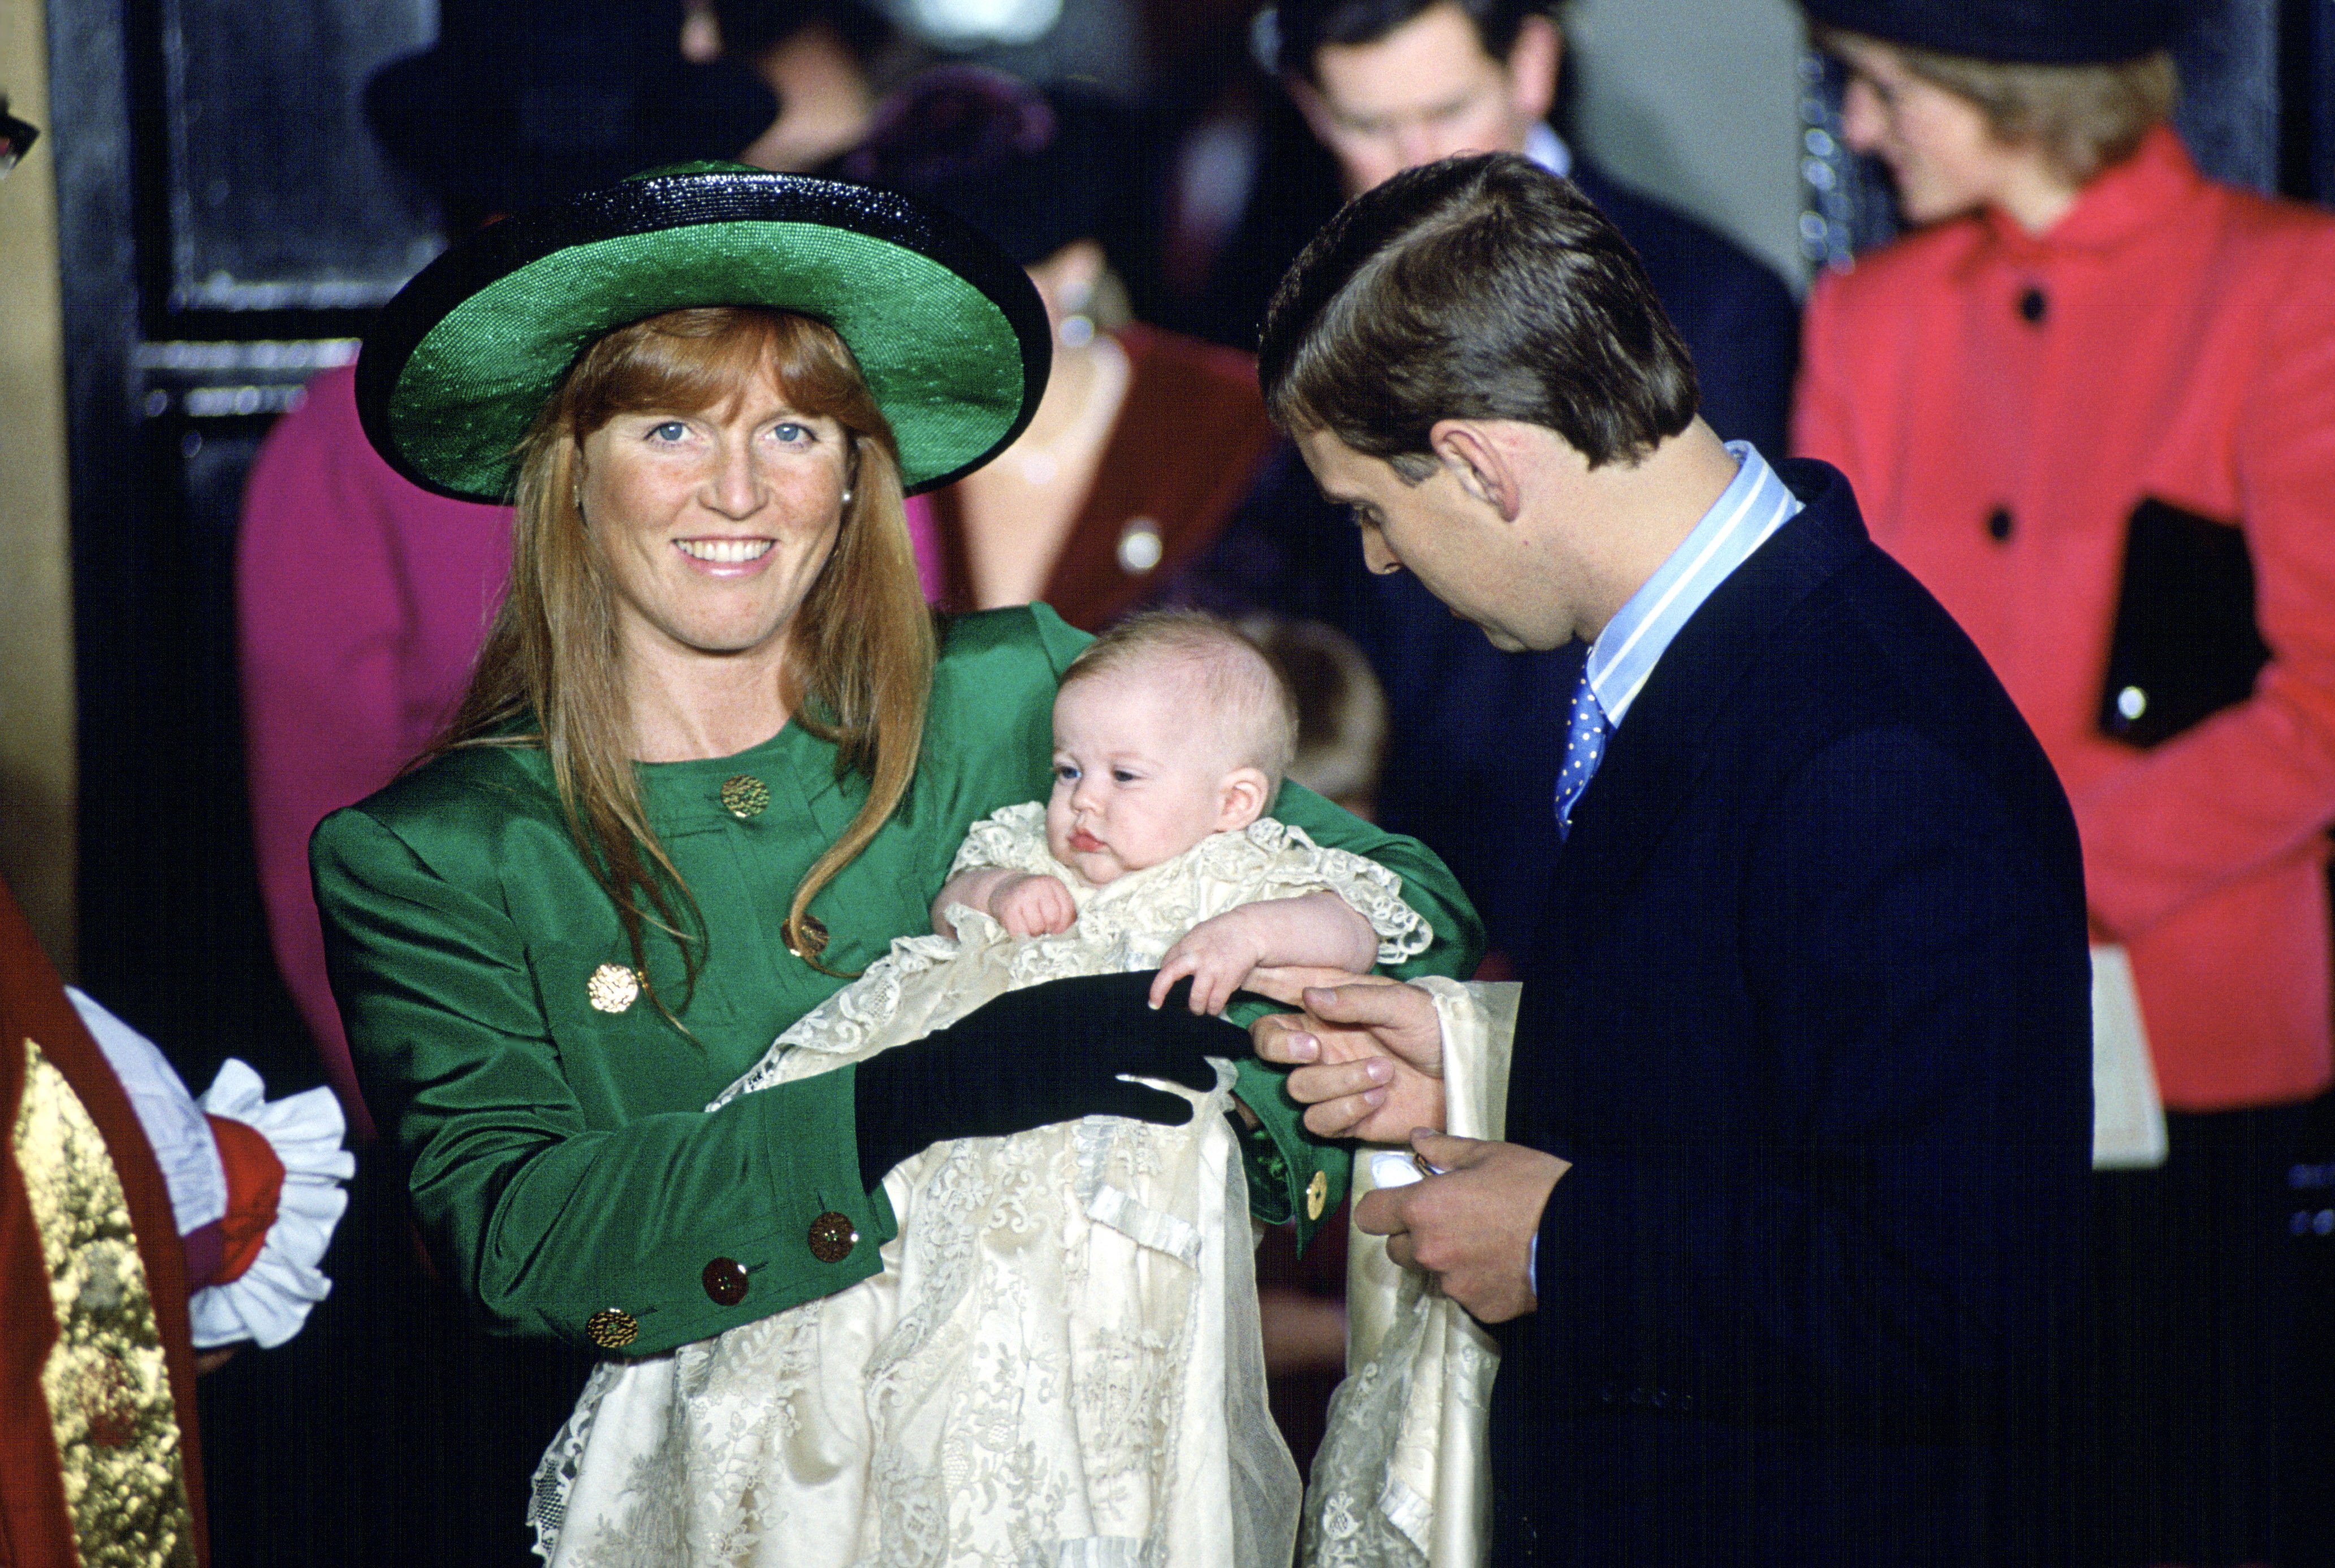 The Duchess Of York (Sarah Ferguson) and Prince Andrew At The Chapel Royal, St James's Palace, For Princess Beatrice's Christening. | Source: Getty Images